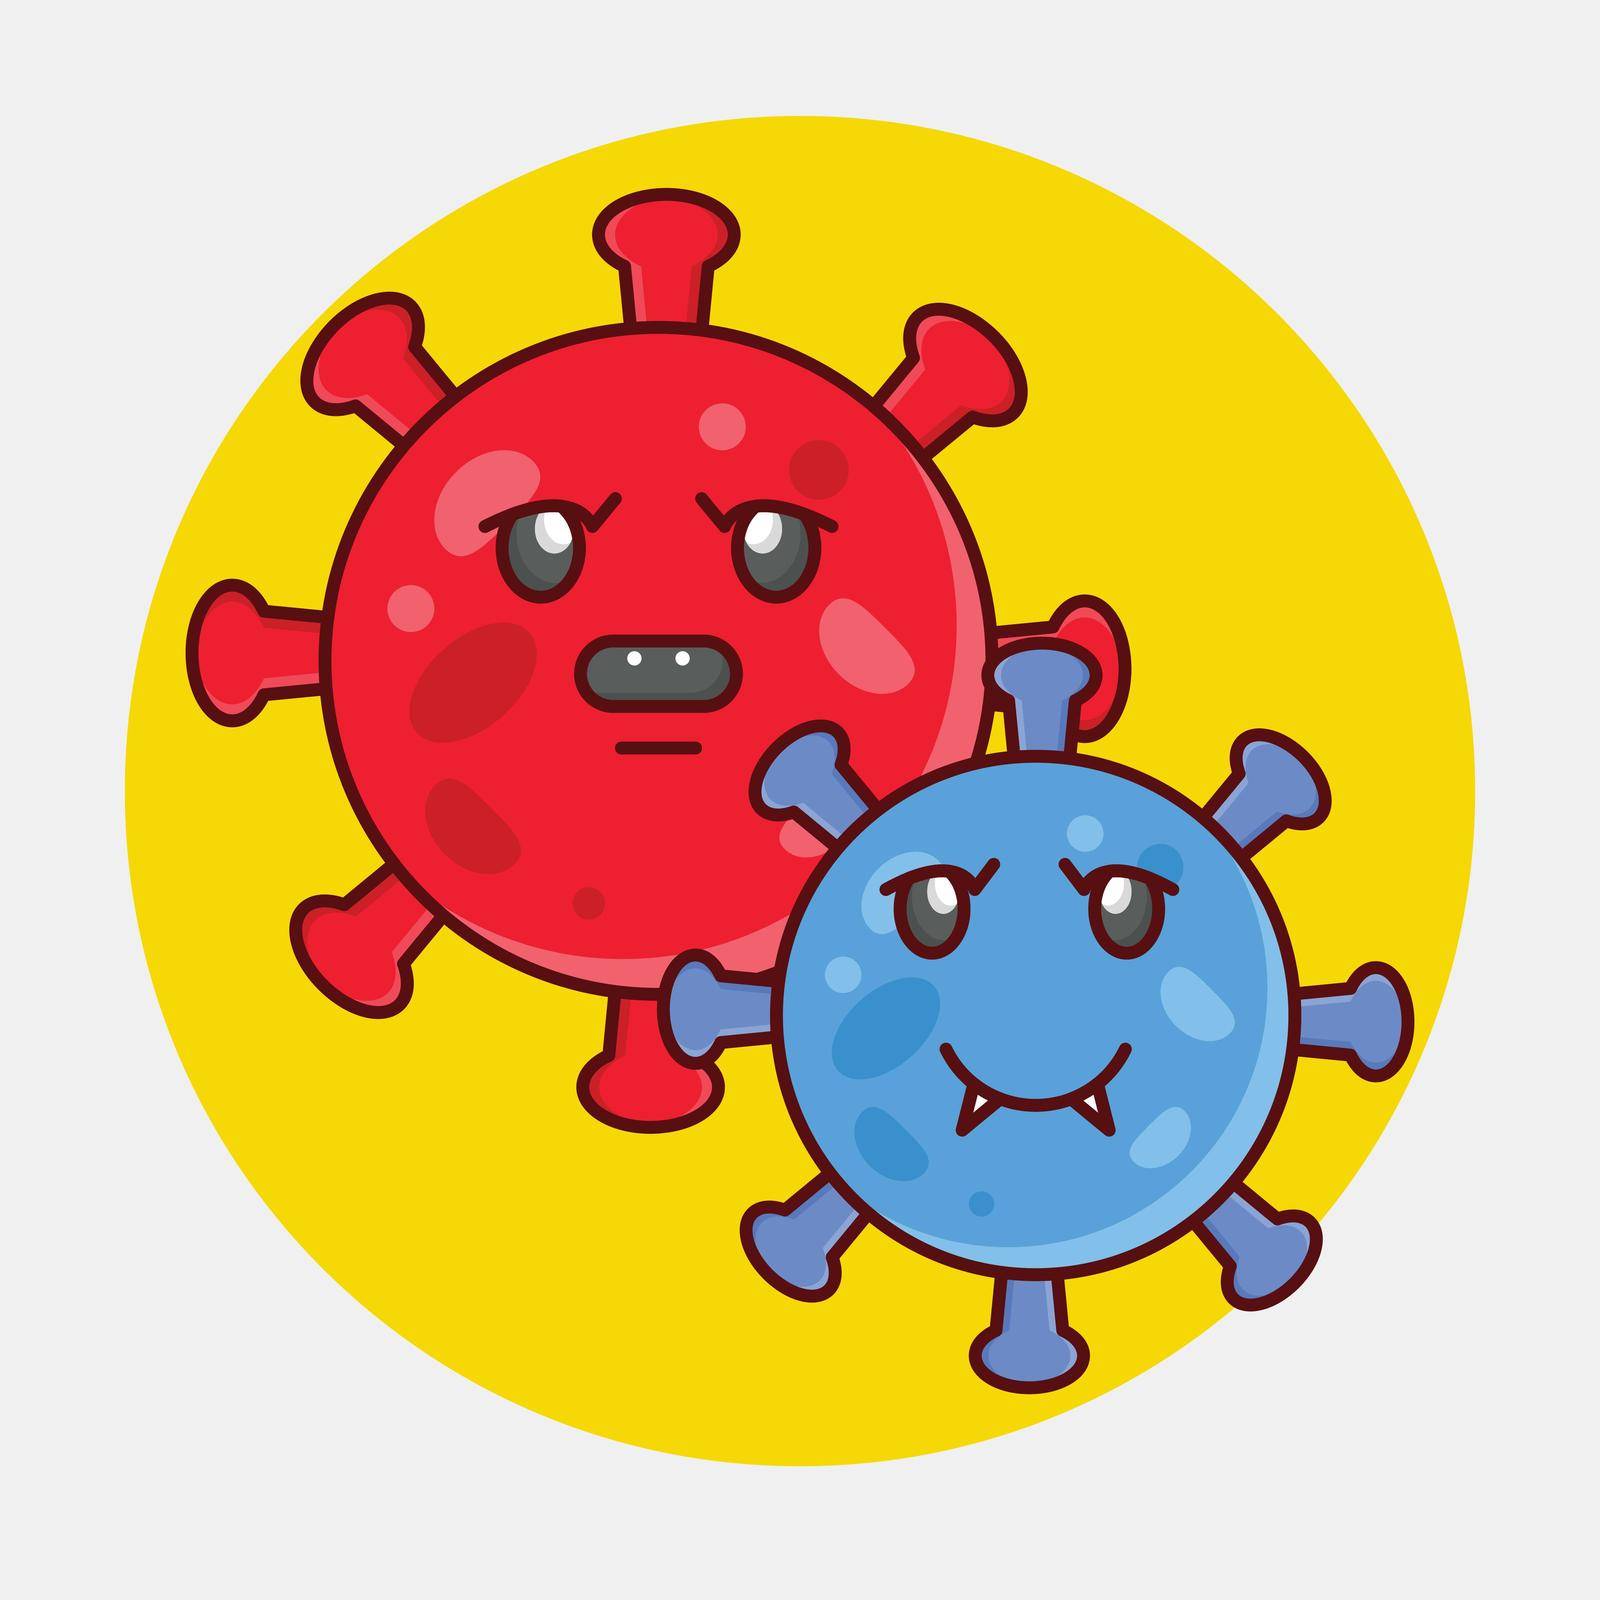 virus Vector illustration on a transparent background. Premium quality symmbols. Vector line flat icons for concept and graphic design.